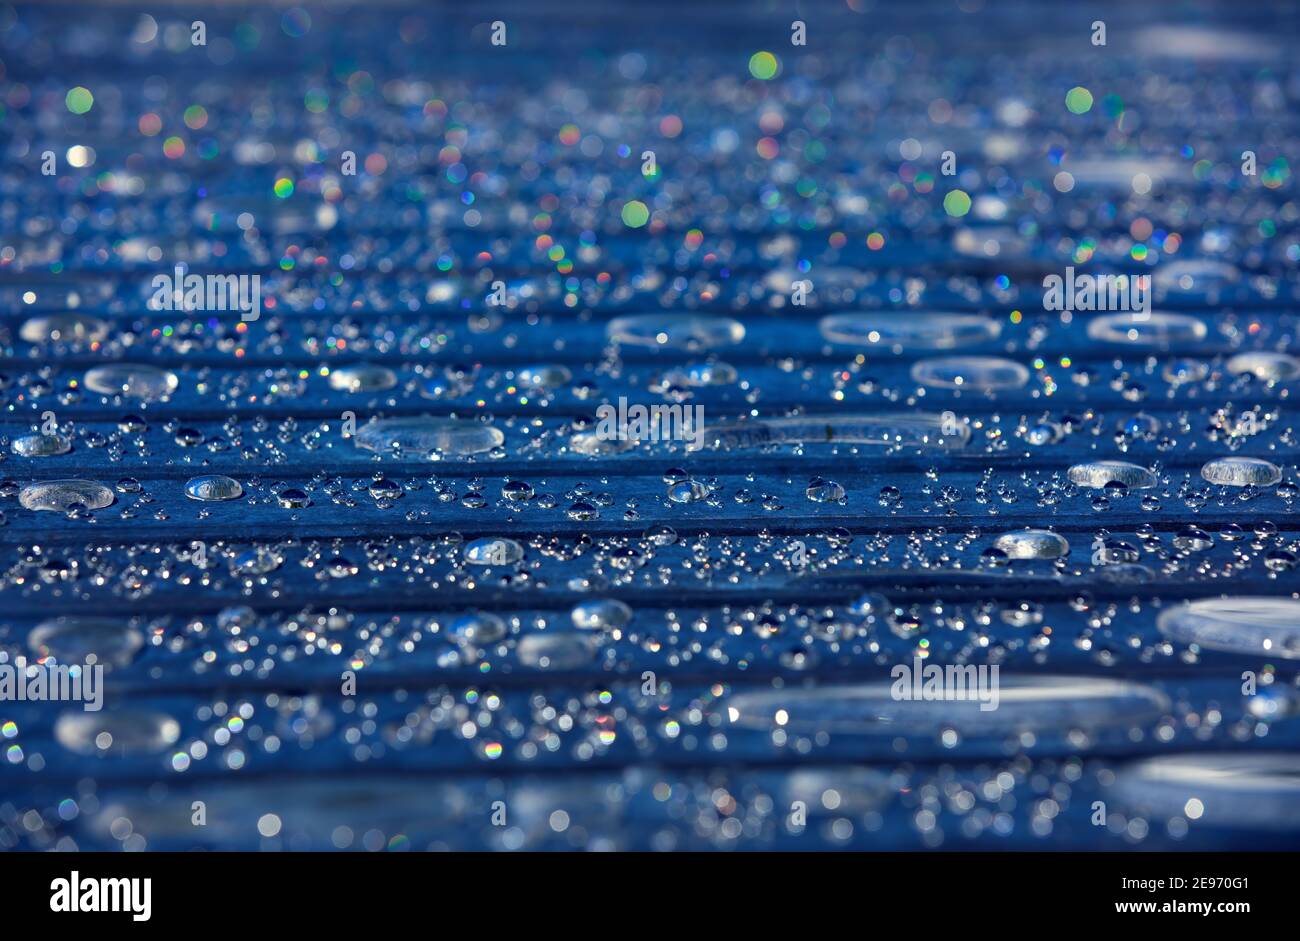 beautiful sparkling, twinkling water drops on dark table slats, abstract background design Stock Photo